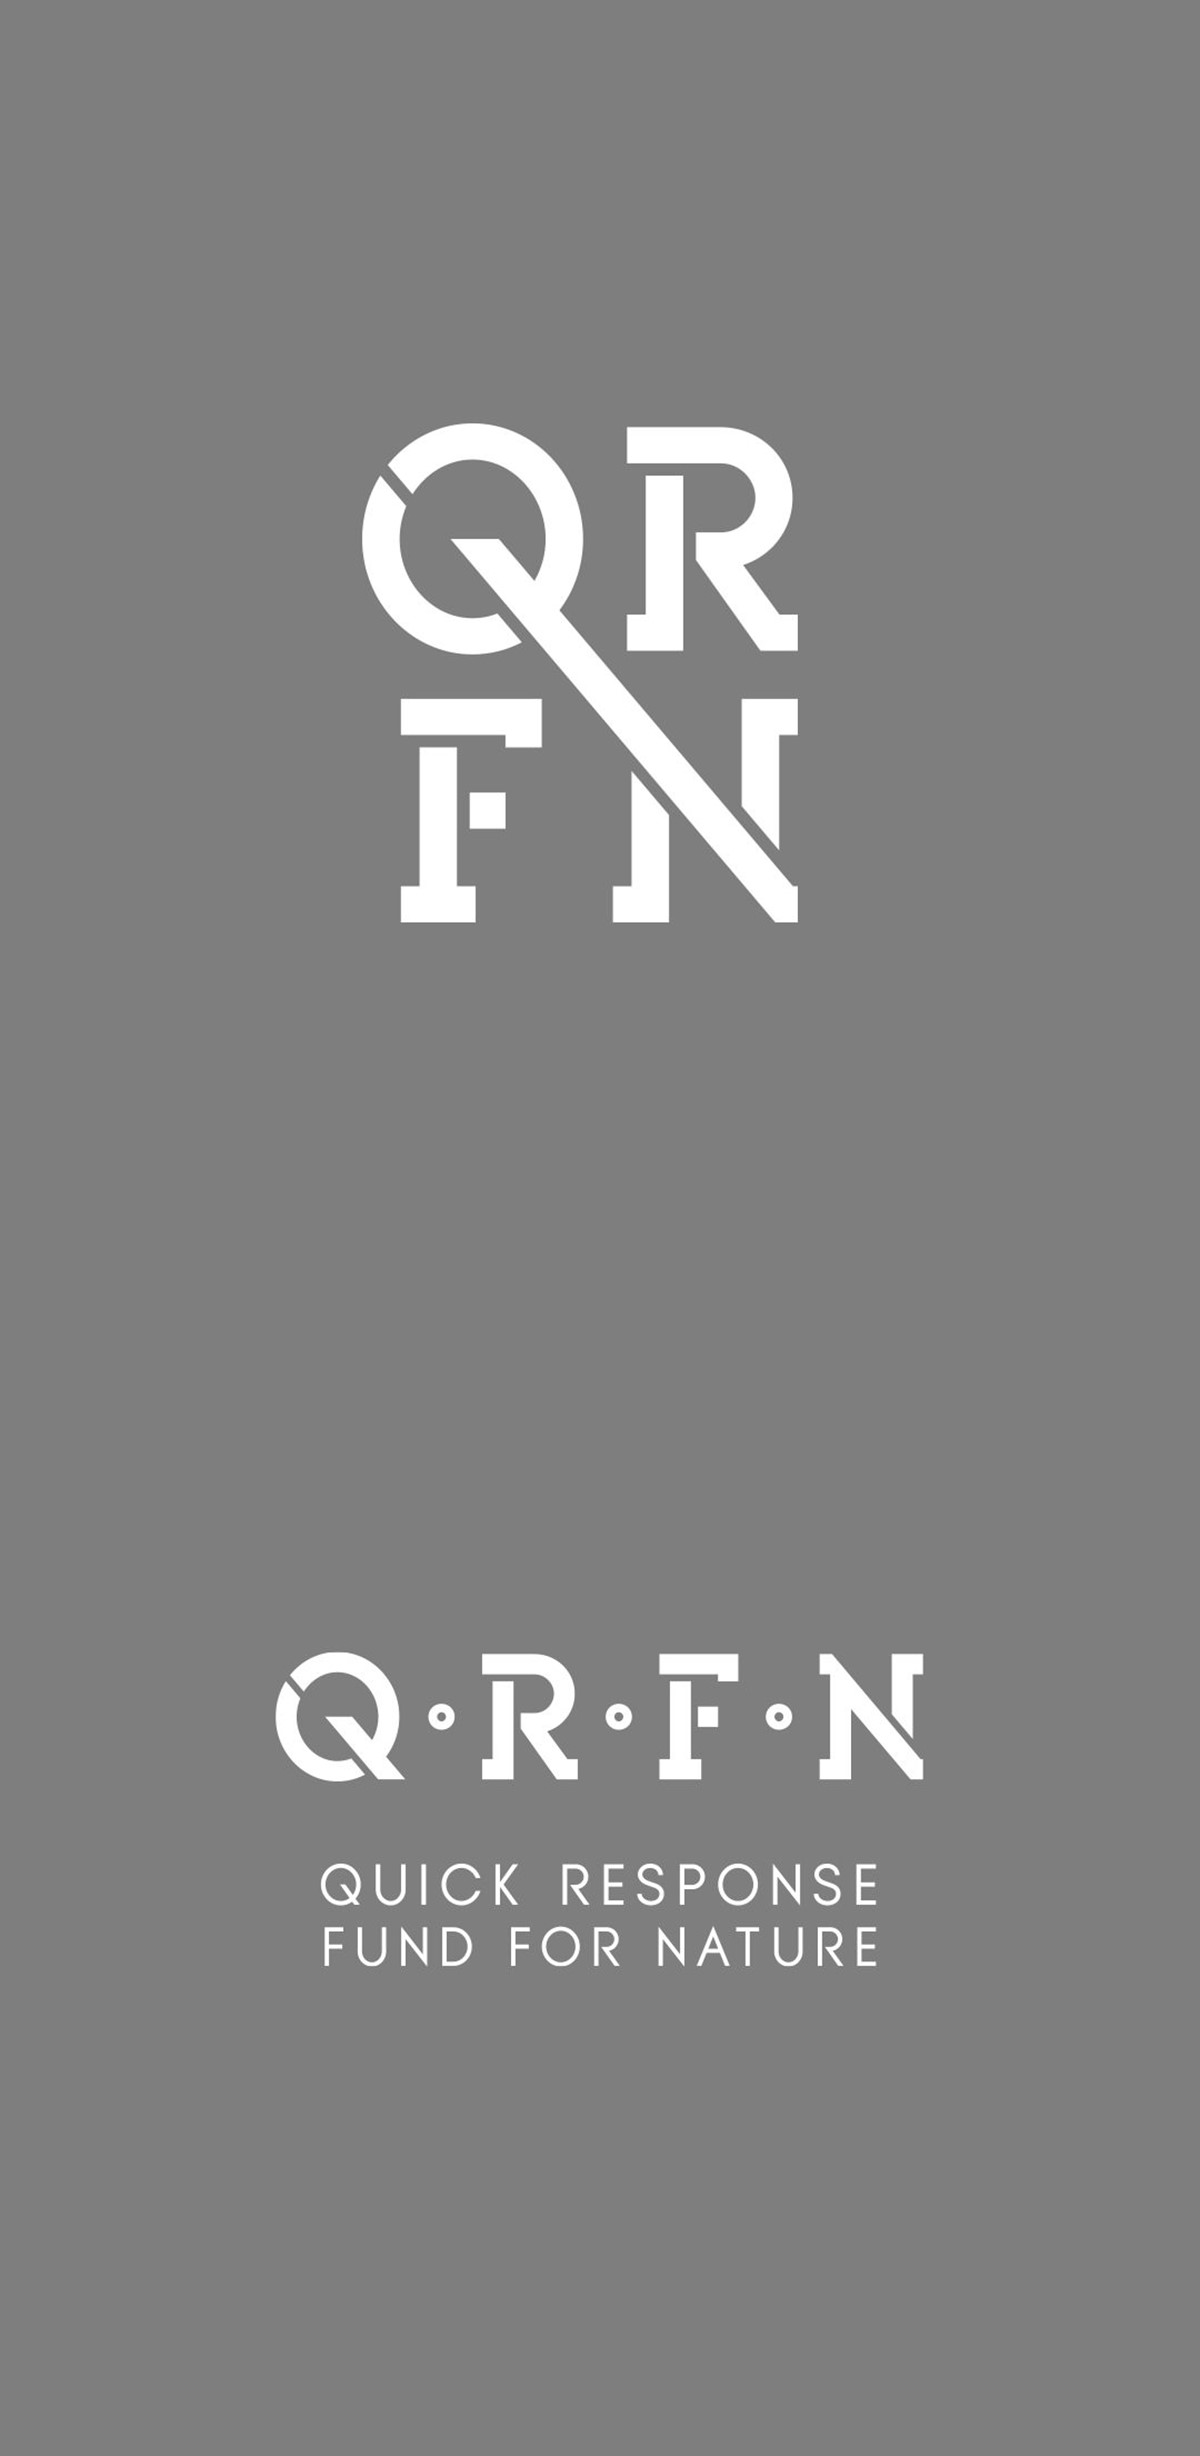 QRFN. Quick Response Fund for Nature – Logotype variations. Brand identity design by Superfried. 